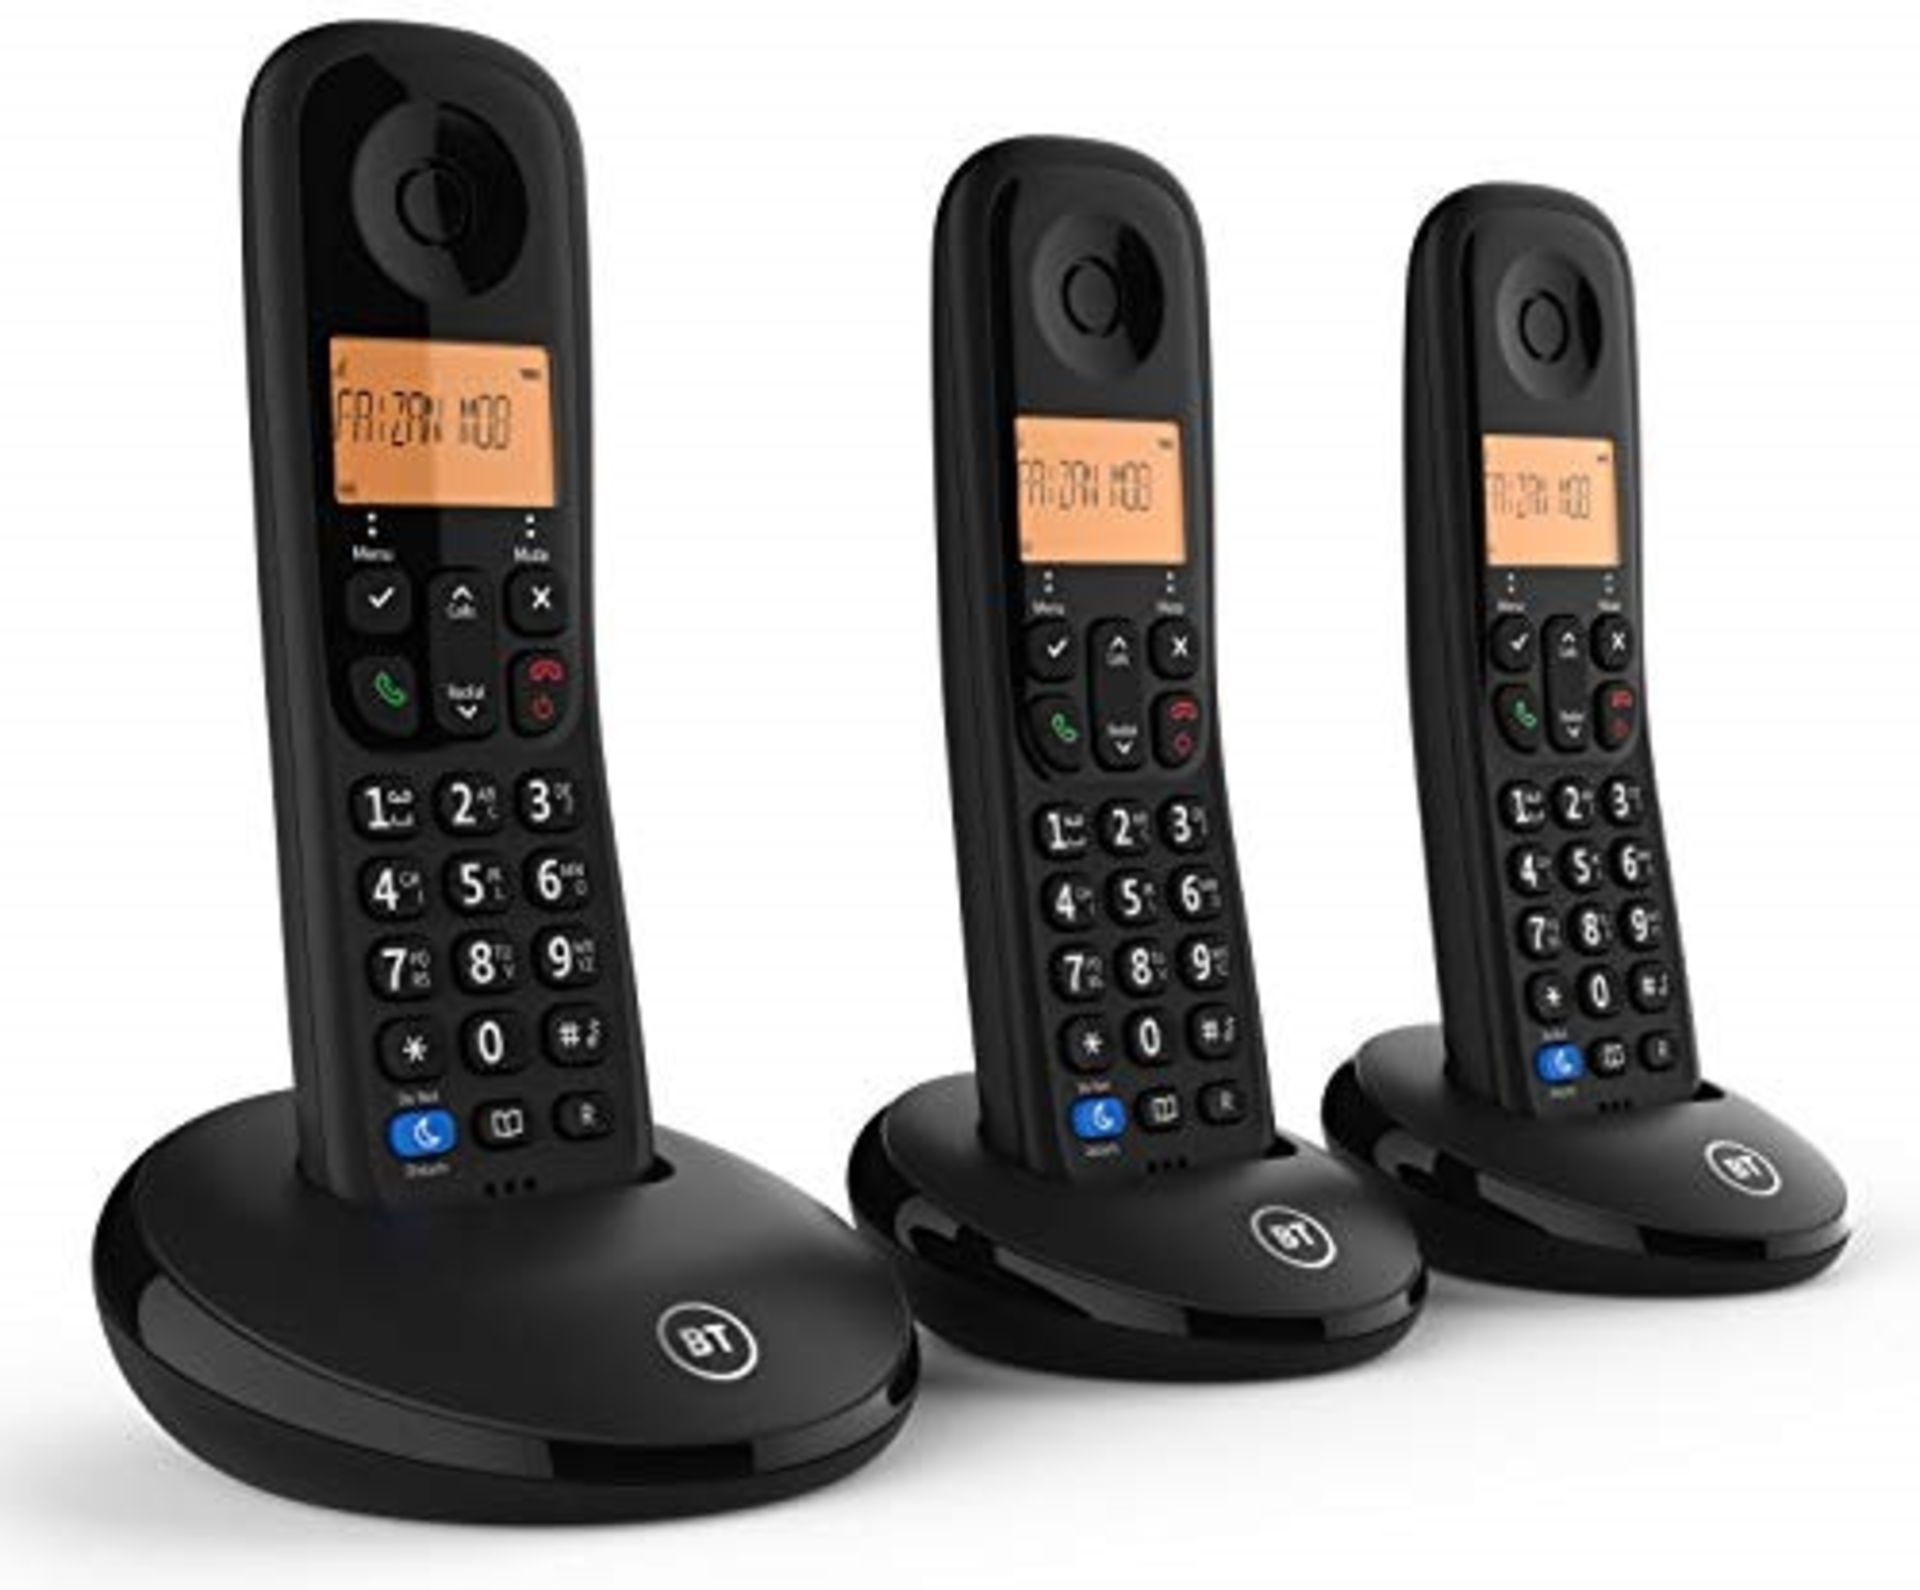 BT Everyday Cordless Home Phone with Basic Call Blocking, Trio Handset Pack, Black